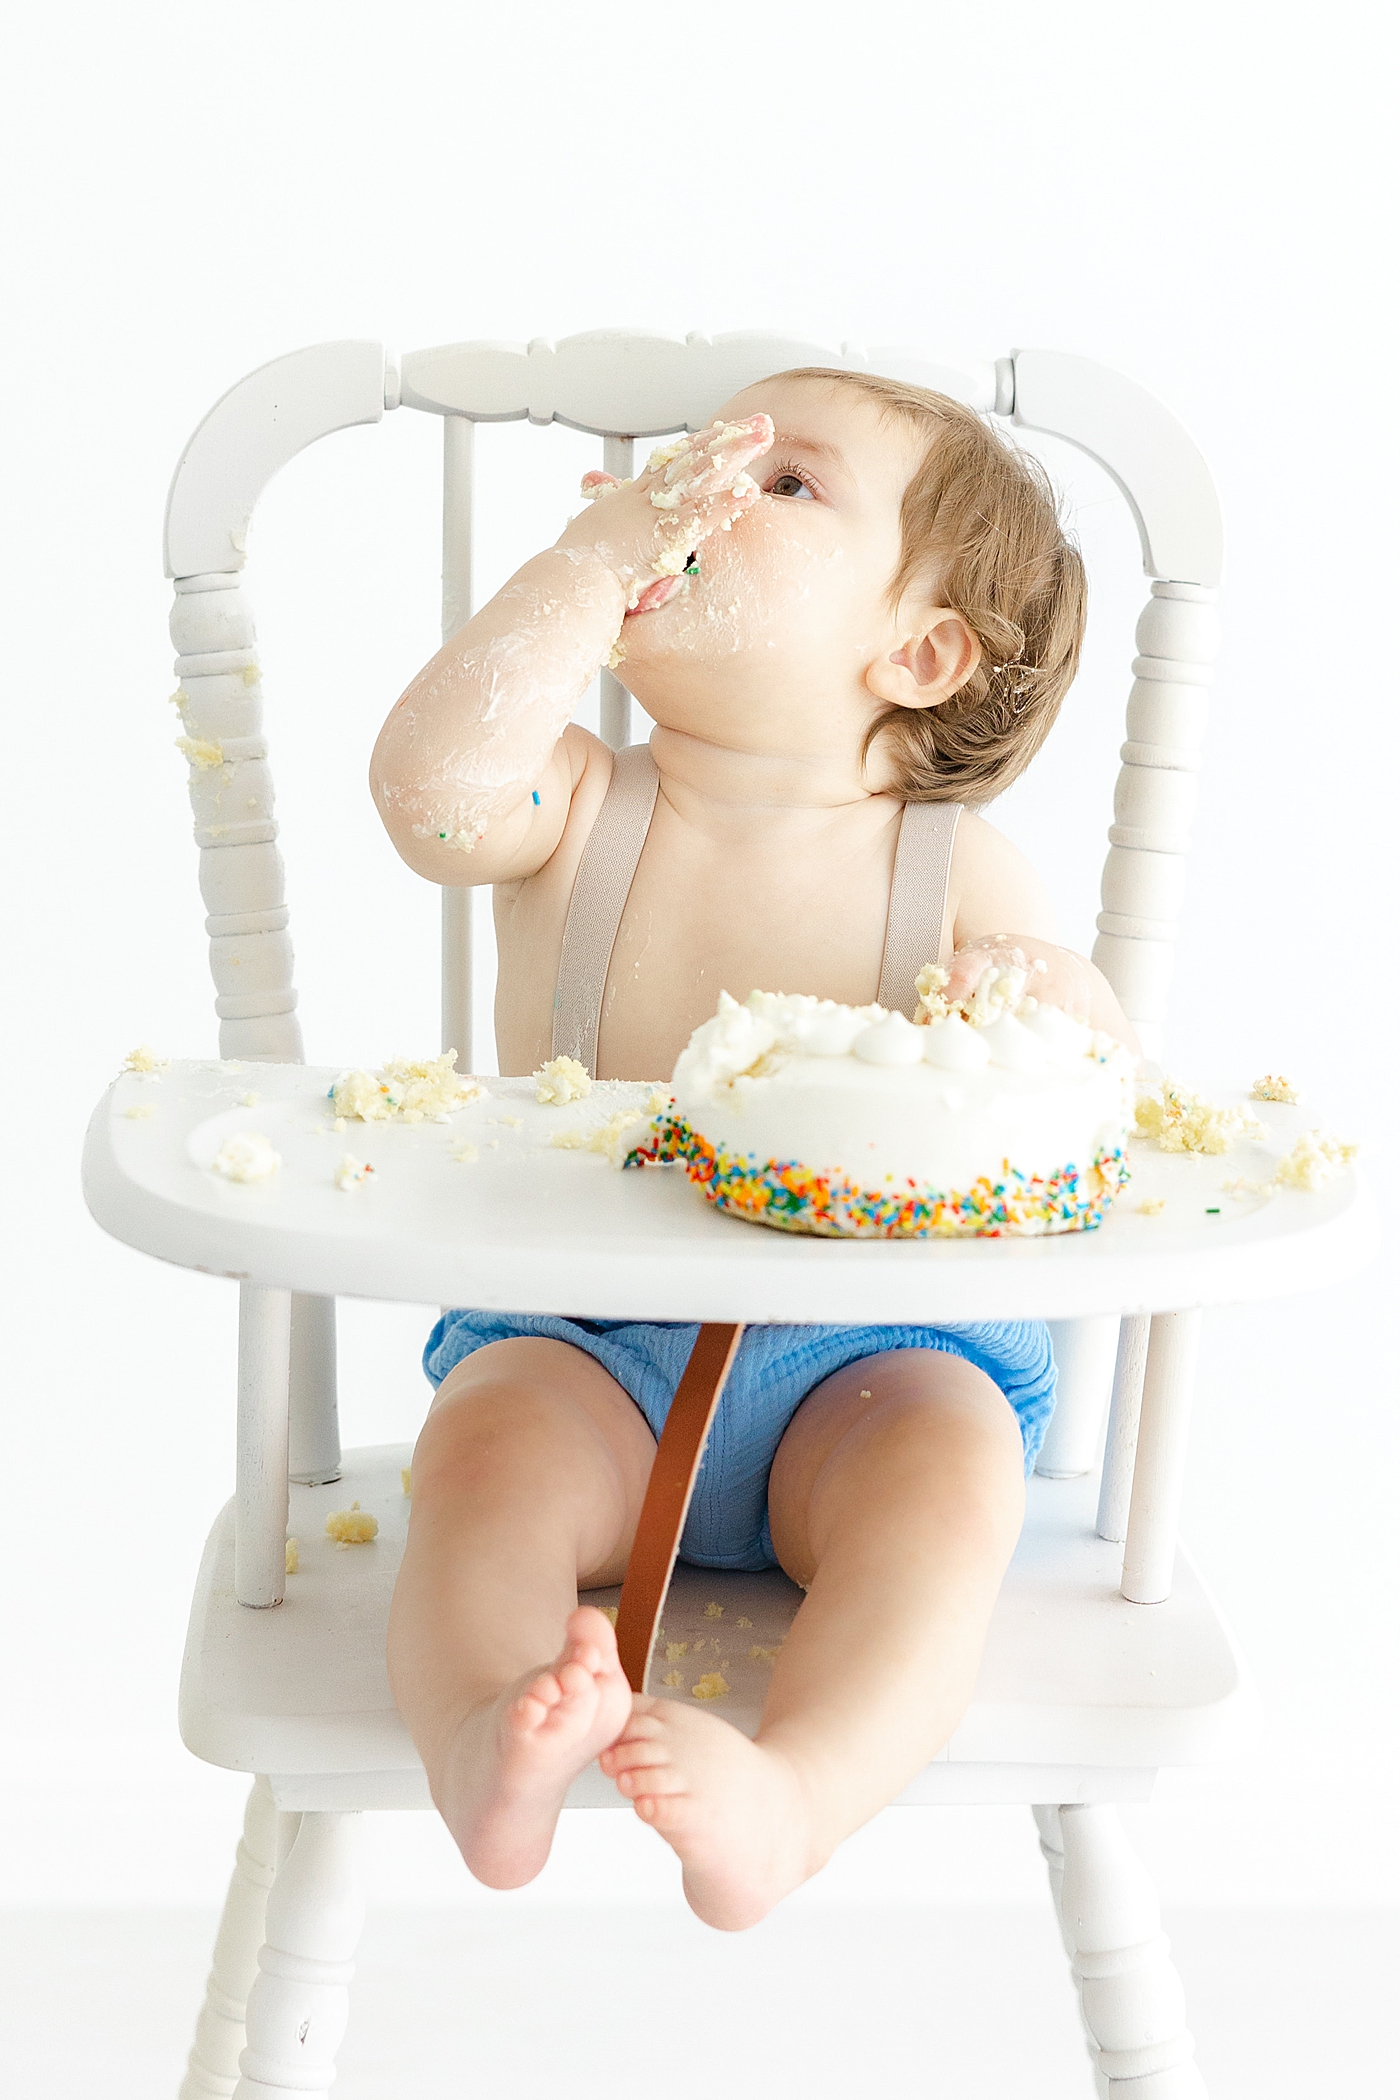 during his cake smash session | Image by Sana Ahmed